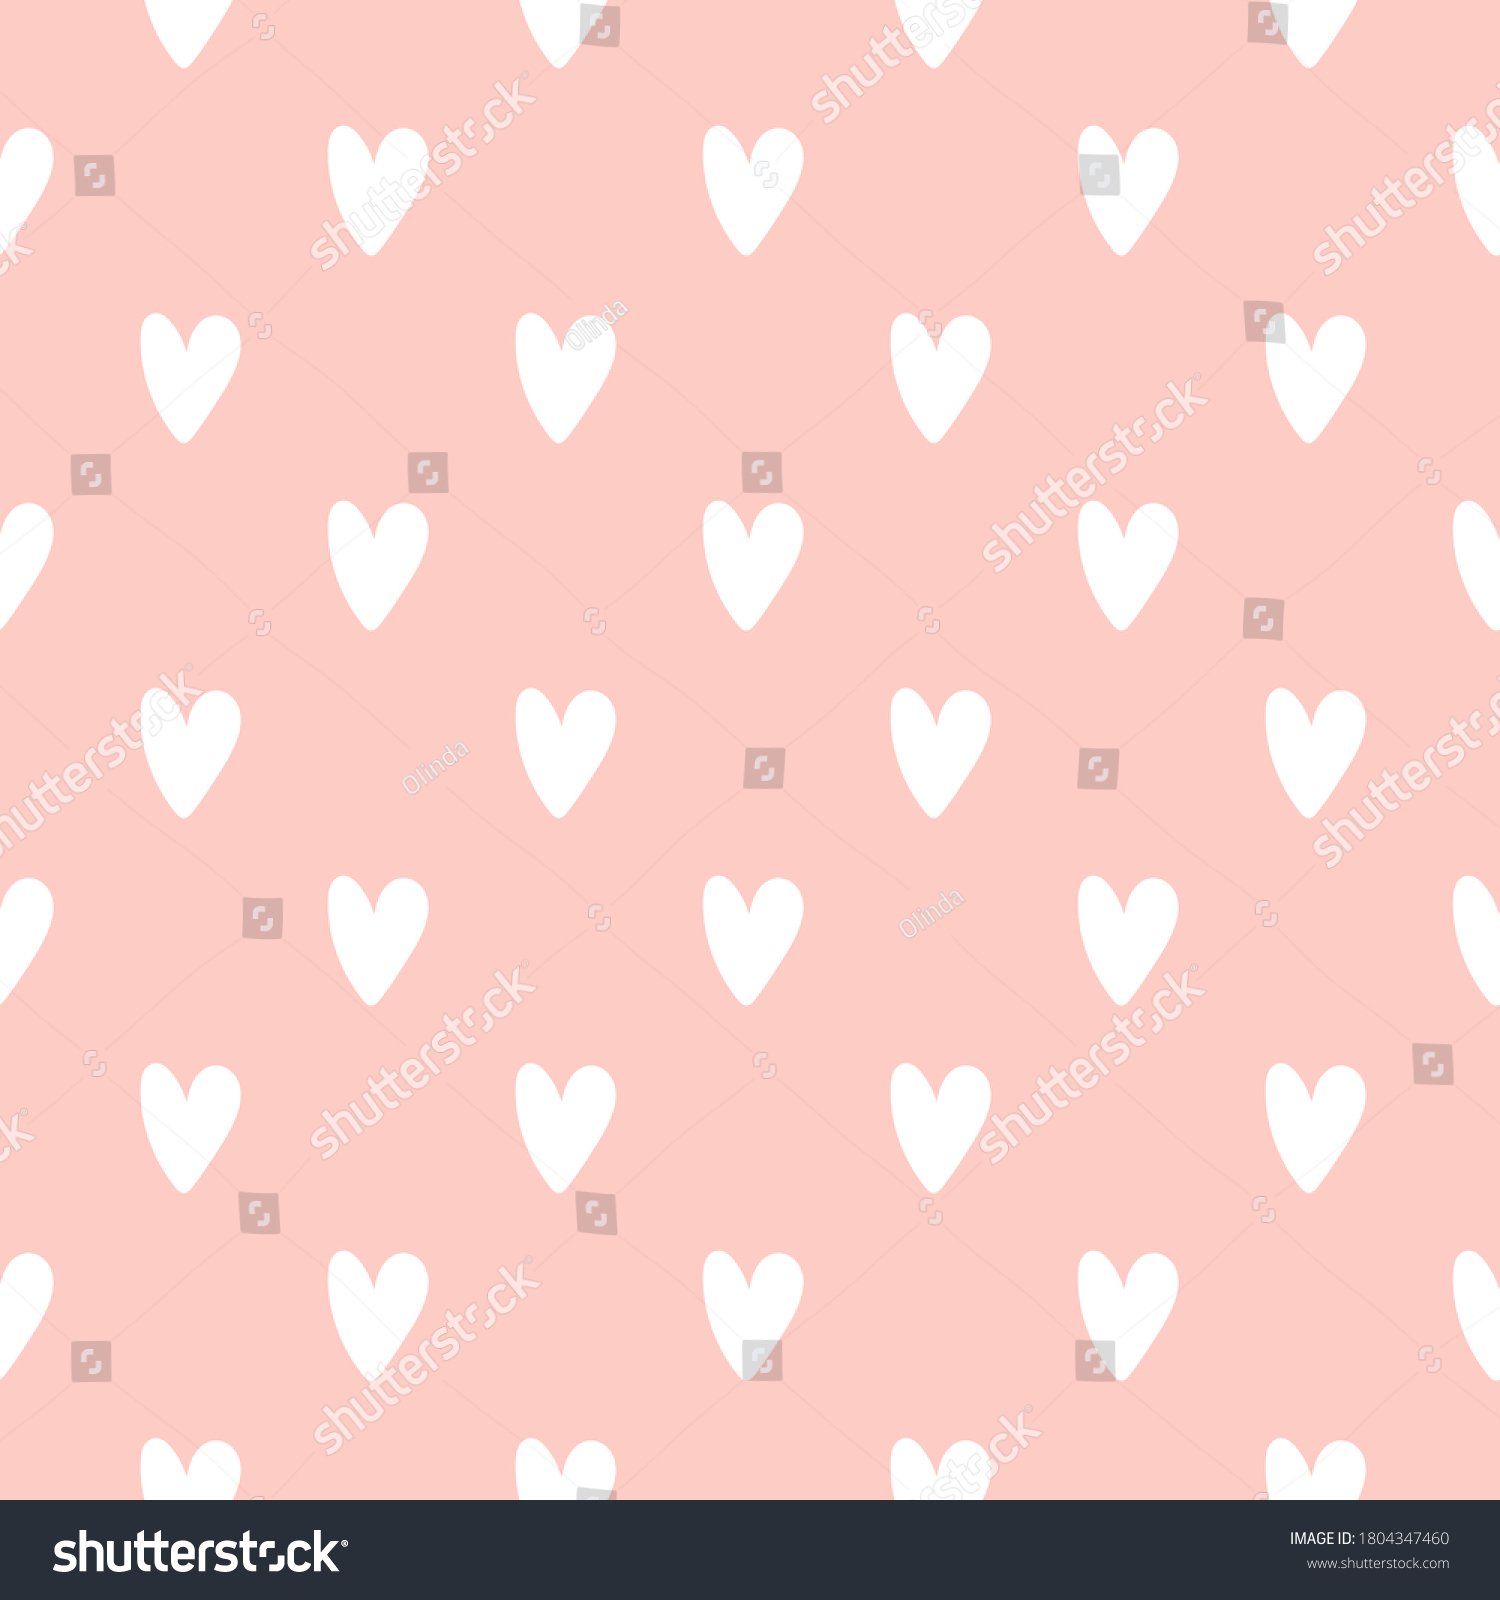 SVG of Seamless pattern white doodle hearts on pastel pink background. Elegant print for fabric textile gift paper scrapbook wallpaper kids clothes nursery decor svg